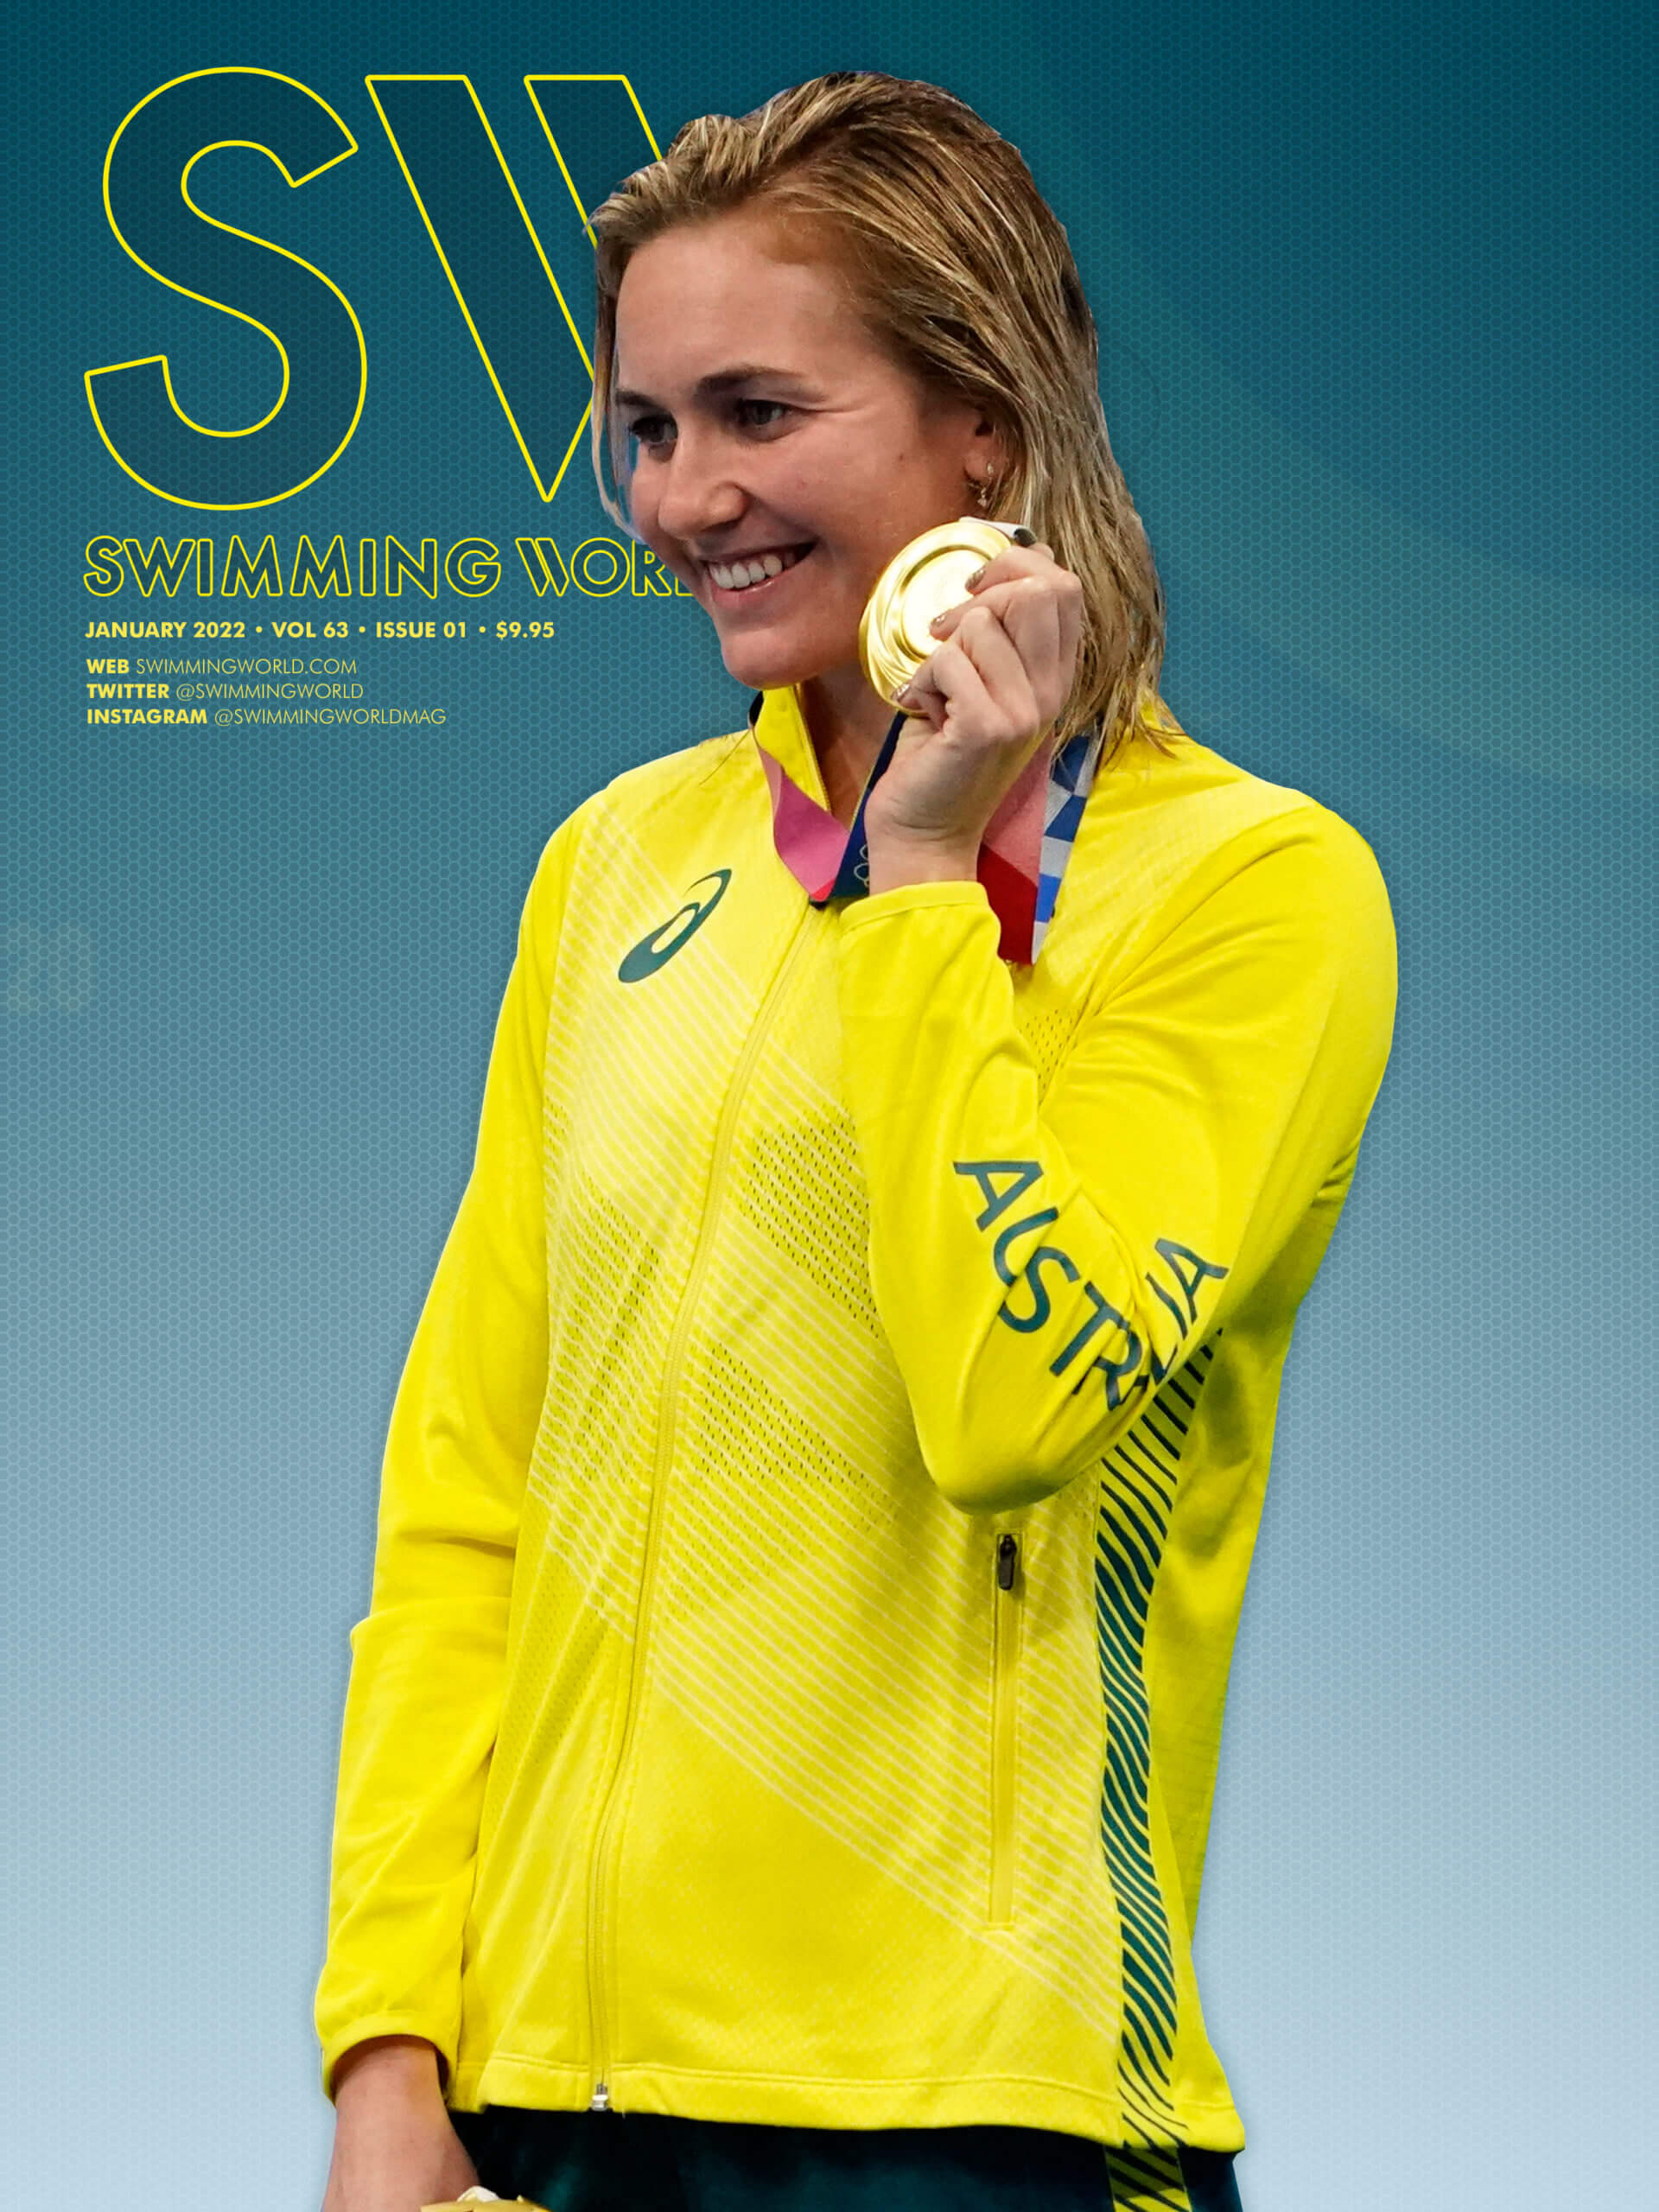 Swimming World January 2022 Cover Teaser Featuring Ariarne Titmus